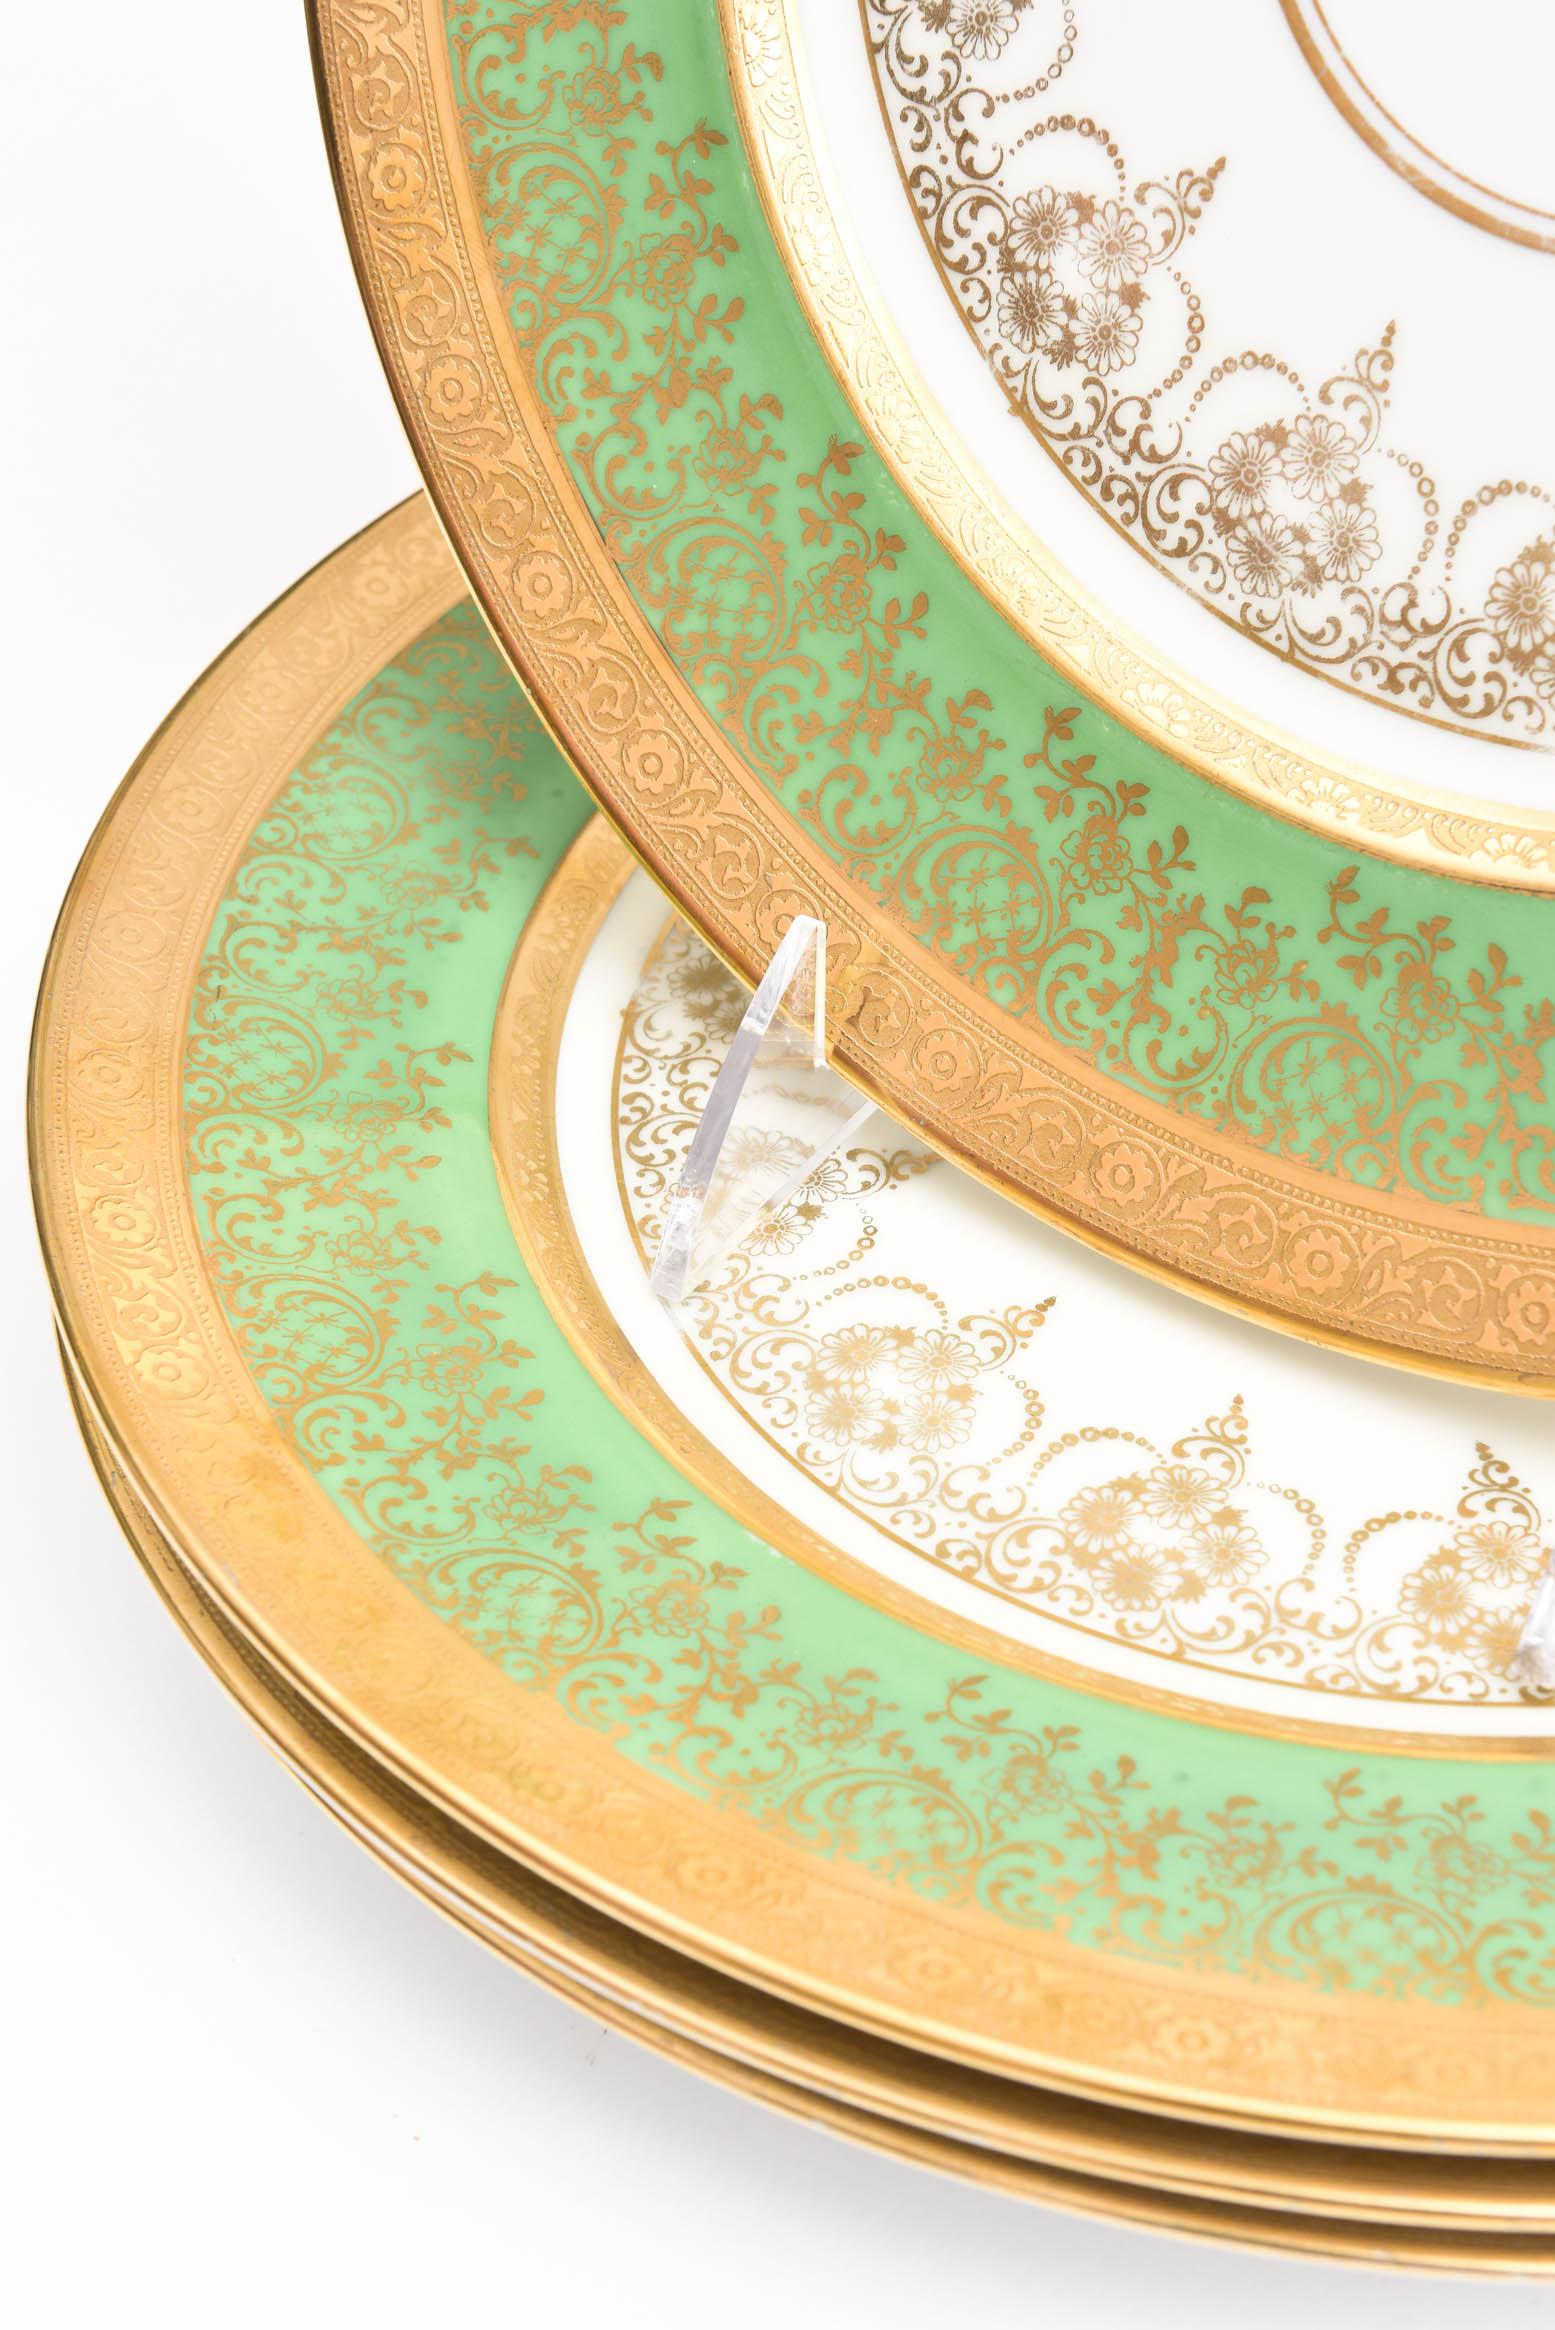 Baroque 12 Antique Green and Gilt Encrusted Service or Presentation Plates